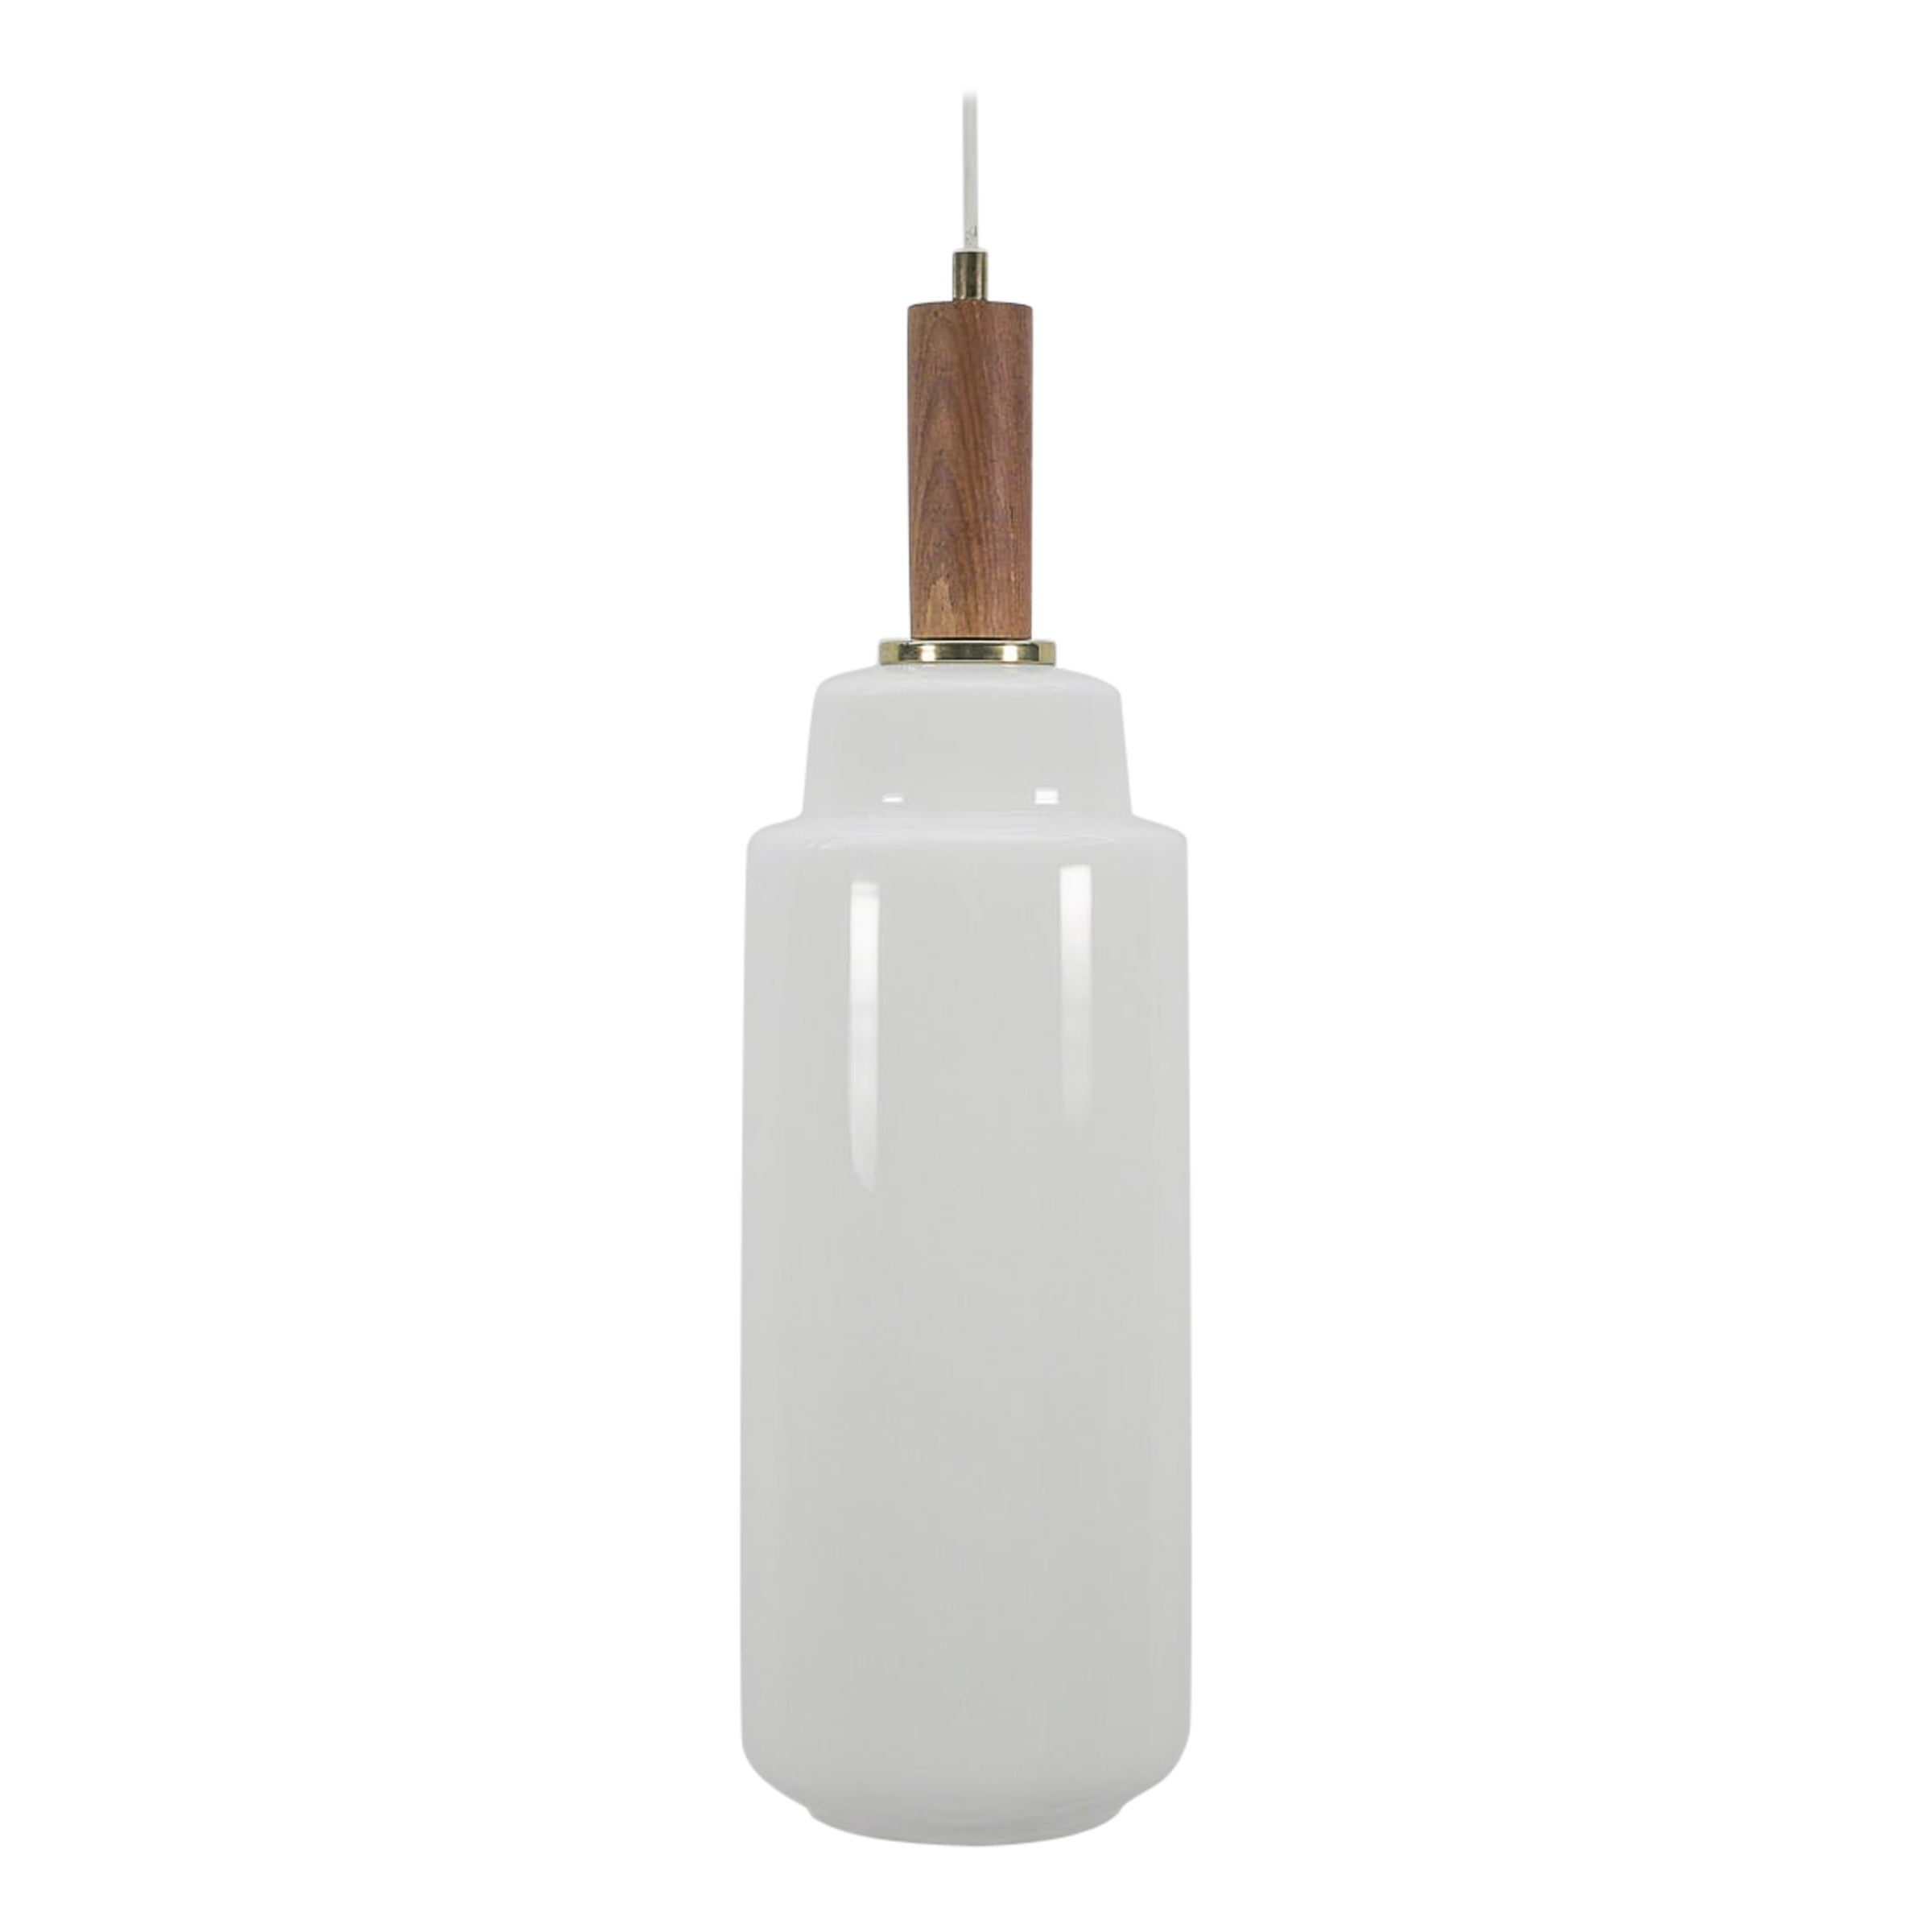 Cylindrical Scandinavian Opal Glass Hanging Lamp with Teak Wood, 1960s For Sale